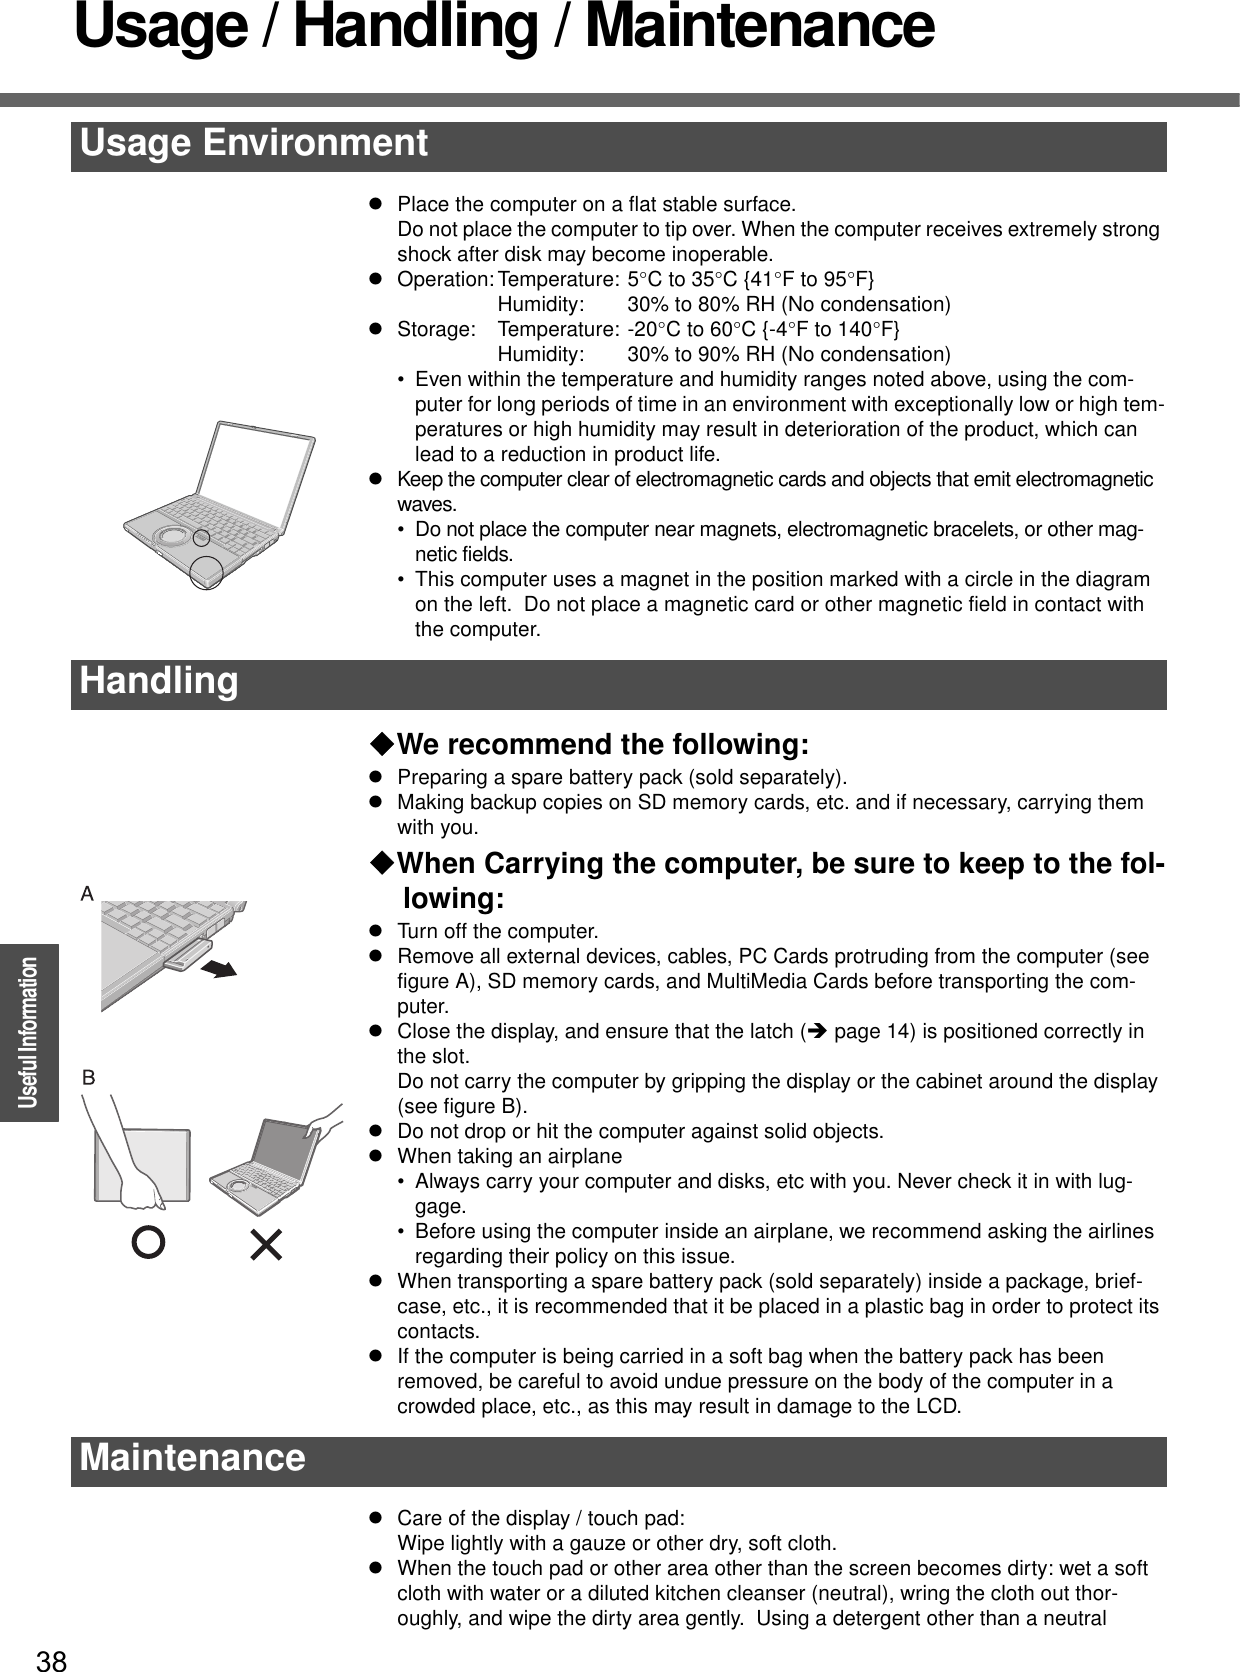 38OperationUseful InformationUsage / Handling / MaintenancezPlace the computer on a flat stable surface.Do not place the computer to tip over. When the computer receives extremely strong shock after disk may become inoperable.zOperation: Temperature: 5°C to 35°C {41°F to 95°F}Humidity: 30% to 80% RH (No condensation)zStorage: Temperature: -20°C to 60°C {-4°F to 140°F}Humidity: 30% to 90% RH (No condensation)• Even within the temperature and humidity ranges noted above, using the com-puter for long periods of time in an environment with exceptionally low or high tem-peratures or high humidity may result in deterioration of the product, which can lead to a reduction in product life.zKeep the computer clear of electromagnetic cards and objects that emit electromagnetic waves.• Do not place the computer near magnets, electromagnetic bracelets, or other mag-netic fields.• This computer uses a magnet in the position marked with a circle in the diagram on the left.  Do not place a magnetic card or other magnetic field in contact with the computer.We recommend the following:zPreparing a spare battery pack (sold separately).zMaking backup copies on SD memory cards, etc. and if necessary, carrying them with you.When Carrying the computer, be sure to keep to the fol-lowing:zTurn off the computer.zRemove all external devices, cables, PC Cards protruding from the computer (see figure A), SD memory cards, and MultiMedia Cards before transporting the com-puter.zClose the display, and ensure that the latch (Îpage 14) is positioned correctly in the slot.Do not carry the computer by gripping the display or the cabinet around the display (see figure B).zDo not drop or hit the computer against solid objects.zWhen taking an airplane• Always carry your computer and disks, etc with you. Never check it in with lug-gage.• Before using the computer inside an airplane, we recommend asking the airlines regarding their policy on this issue.zWhen transporting a spare battery pack (sold separately) inside a package, brief-case, etc., it is recommended that it be placed in a plastic bag in order to protect its contacts.zIf the computer is being carried in a soft bag when the battery pack has been removed, be careful to avoid undue pressure on the body of the computer in a crowded place, etc., as this may result in damage to the LCD.zCare of the display / touch pad:Wipe lightly with a gauze or other dry, soft cloth.zWhen the touch pad or other area other than the screen becomes dirty: wet a soft cloth with water or a diluted kitchen cleanser (neutral), wring the cloth out thor-oughly, and wipe the dirty area gently.  Using a detergent other than a neutral Usage EnvironmentHandlingMaintenance